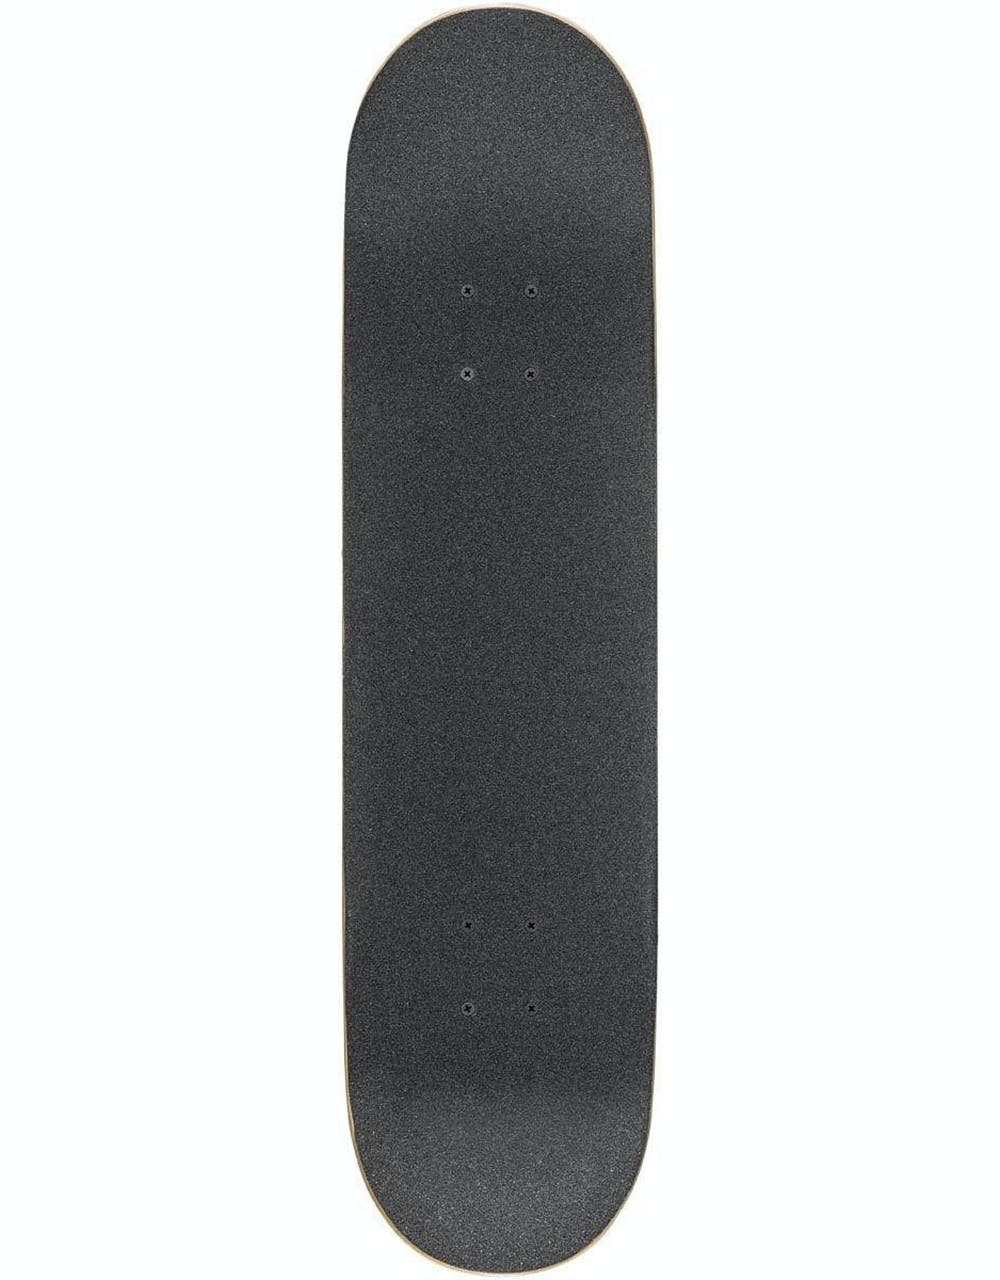 Globe G1 Excess Complete Skateboard - 8"